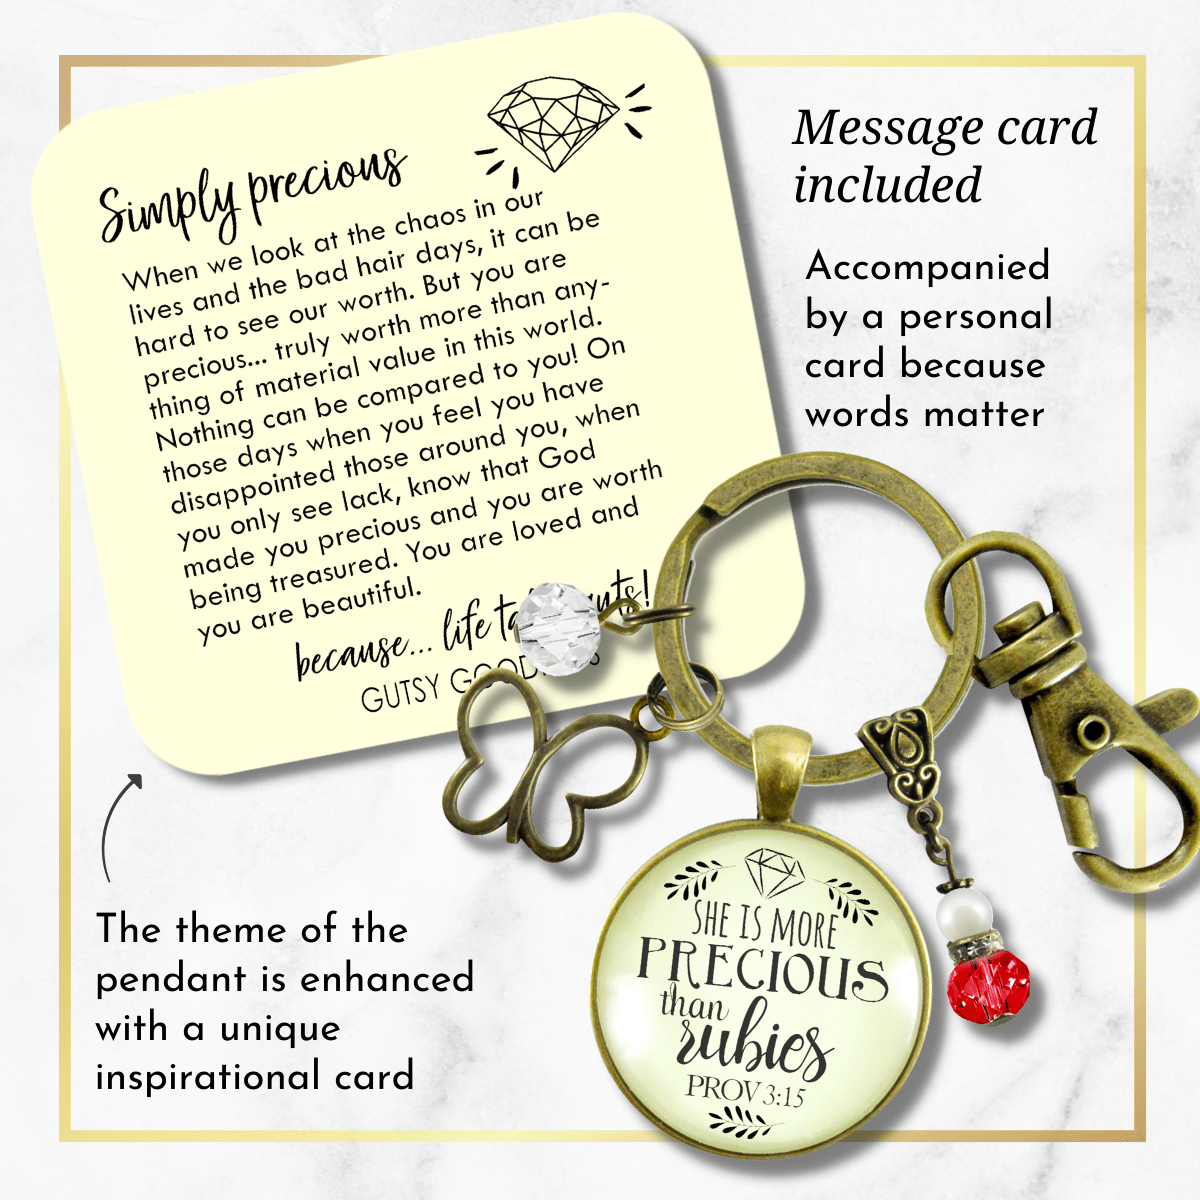 She More Precious Rubies Keychain Fashion Faith Inspired Jewelry For Cherished Woman - Gutsy Goodness